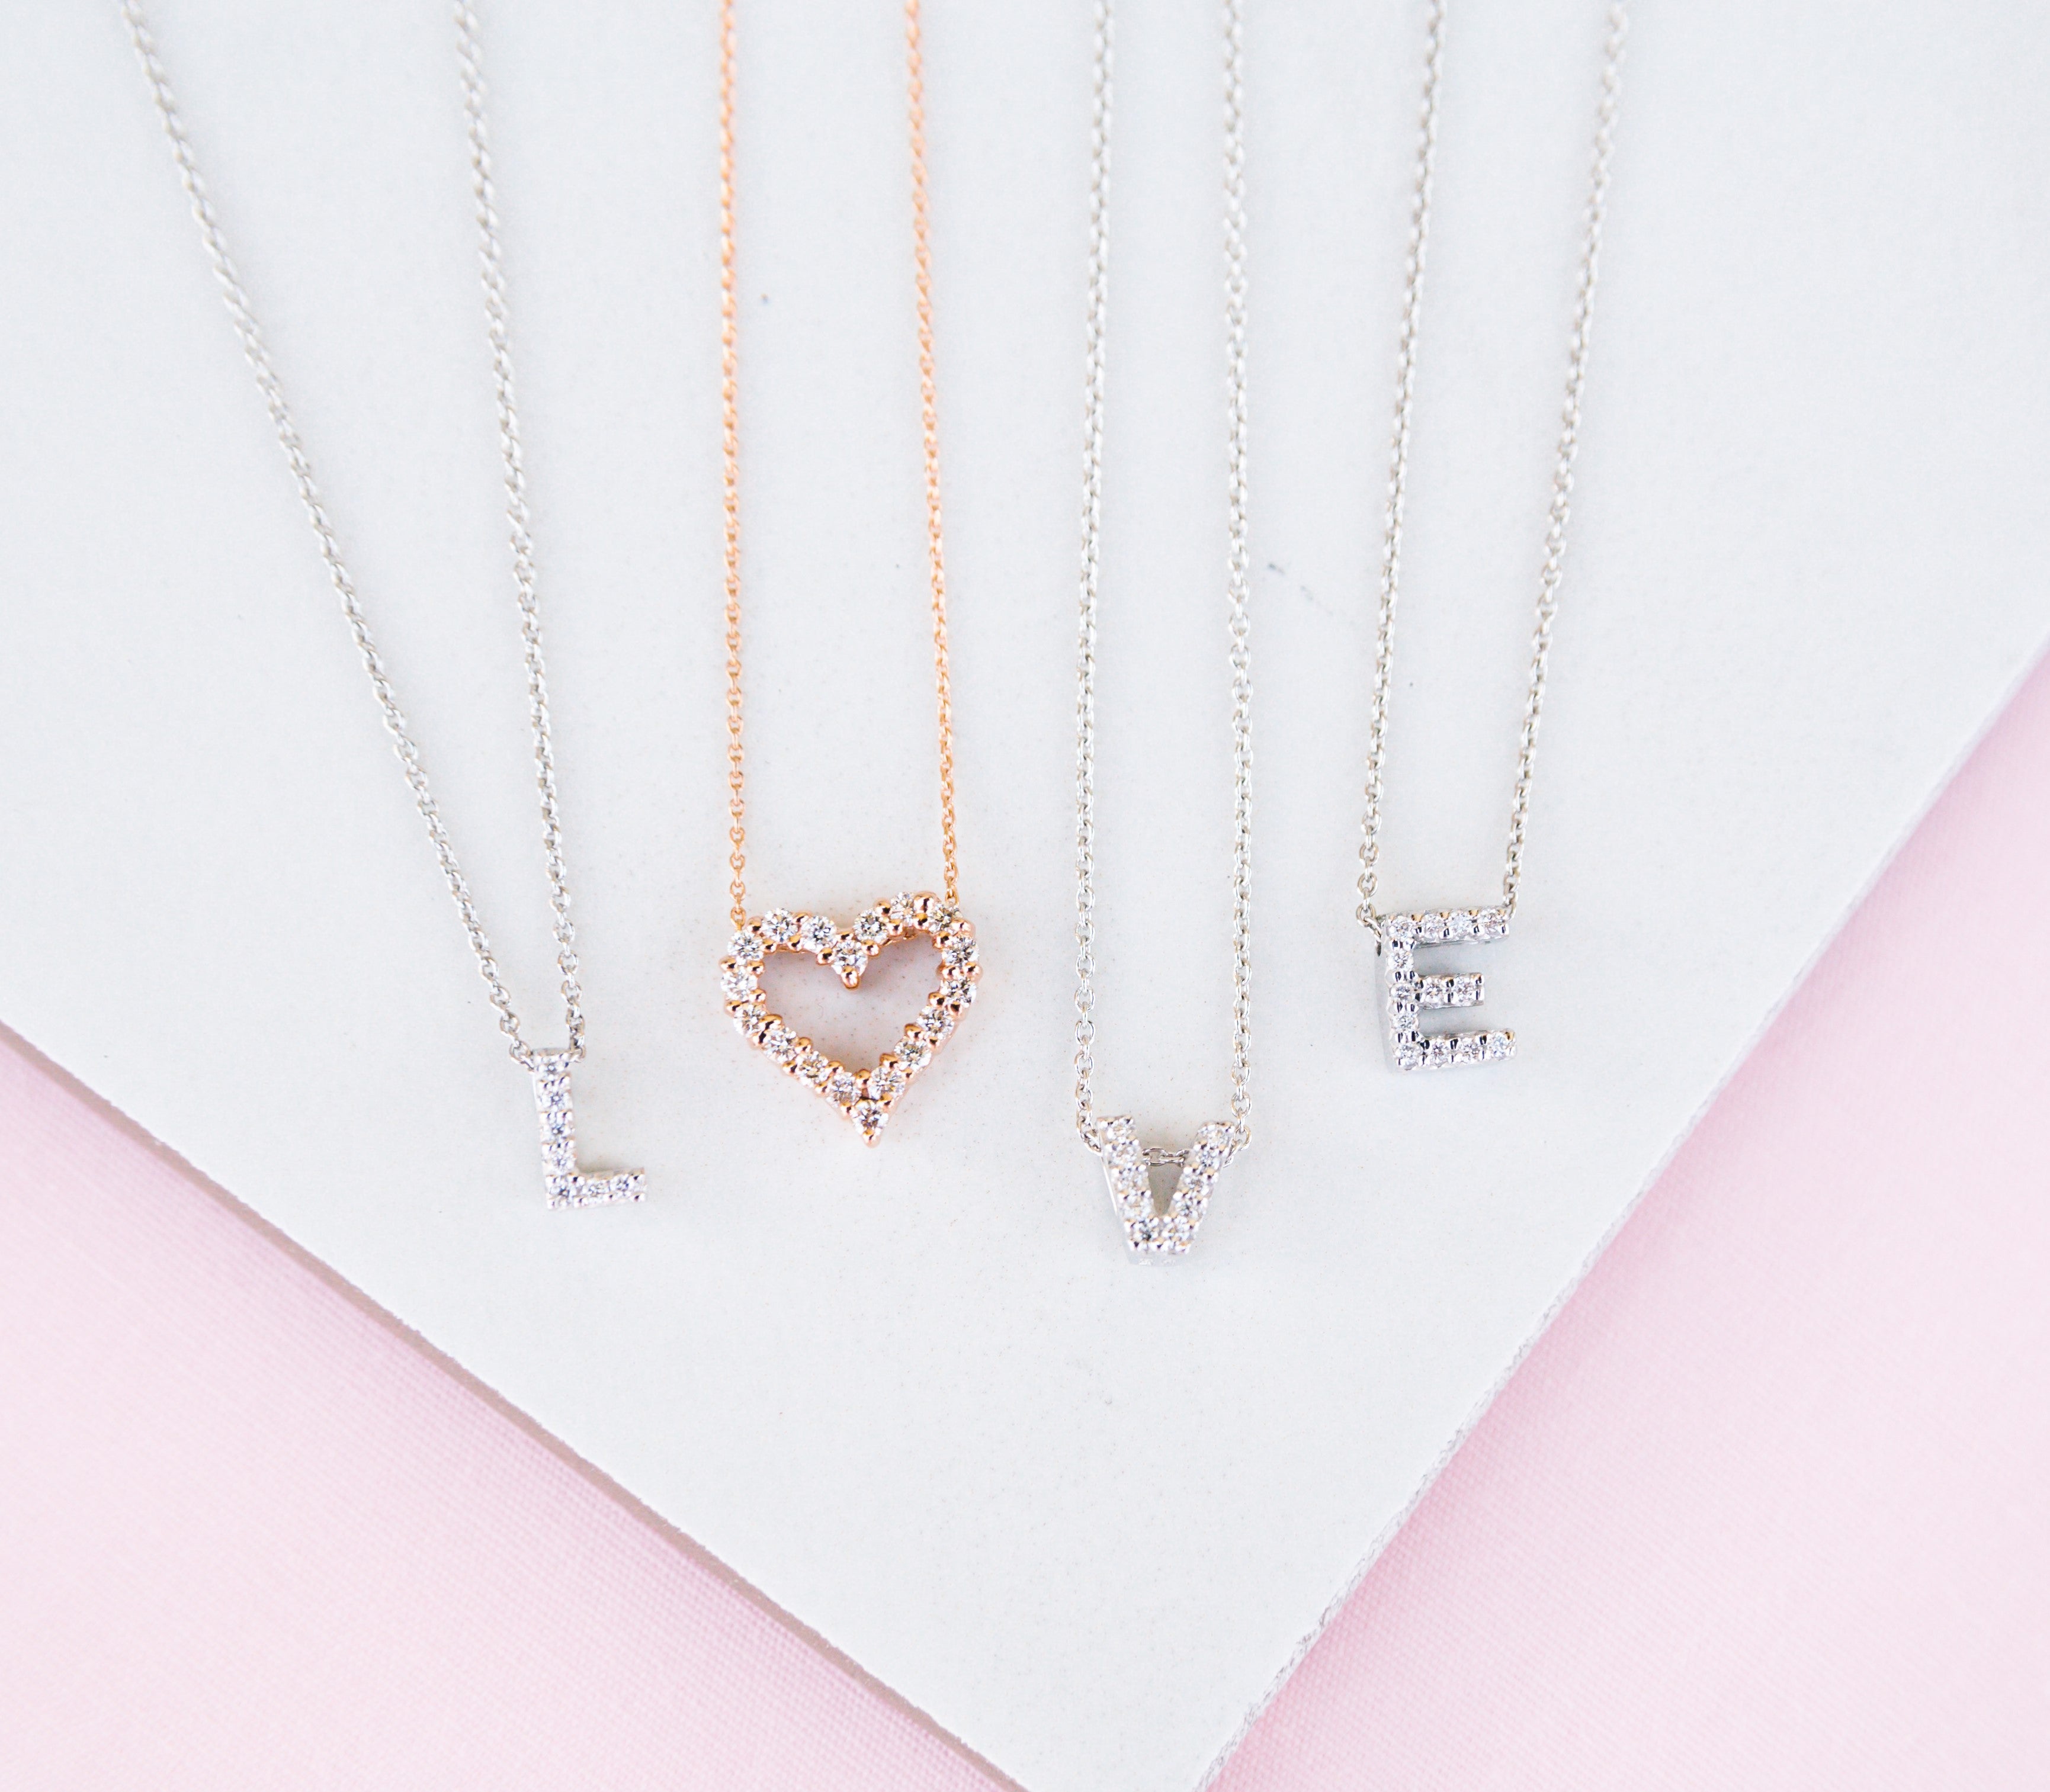 We always make sure that your monogram necklace is unique and made for